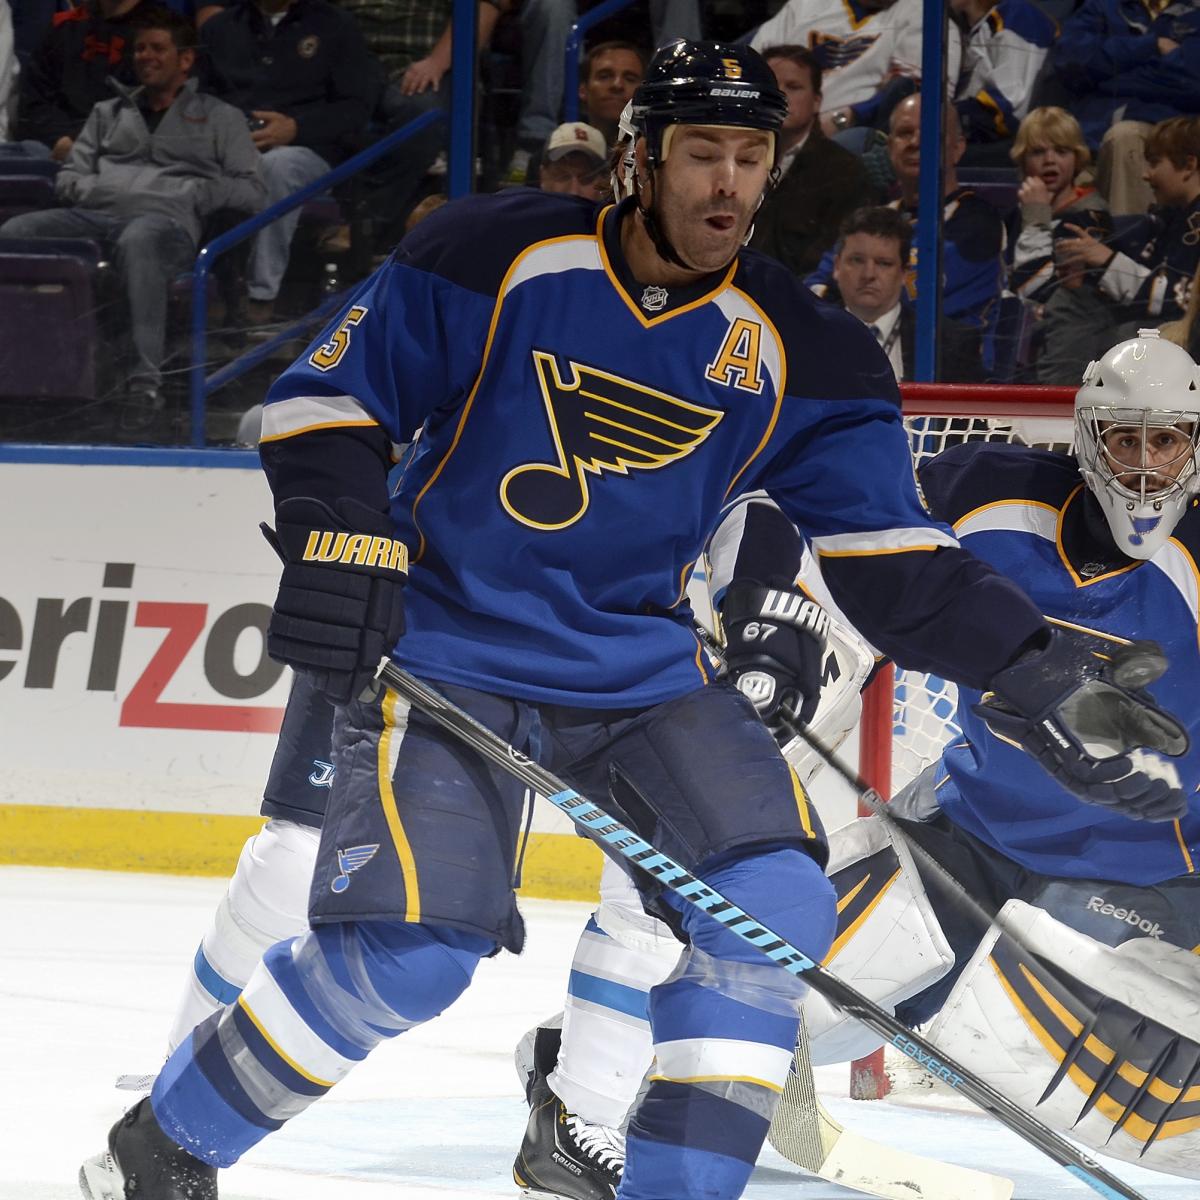 St. Louis Blues Best Player In Each Number: 99-61